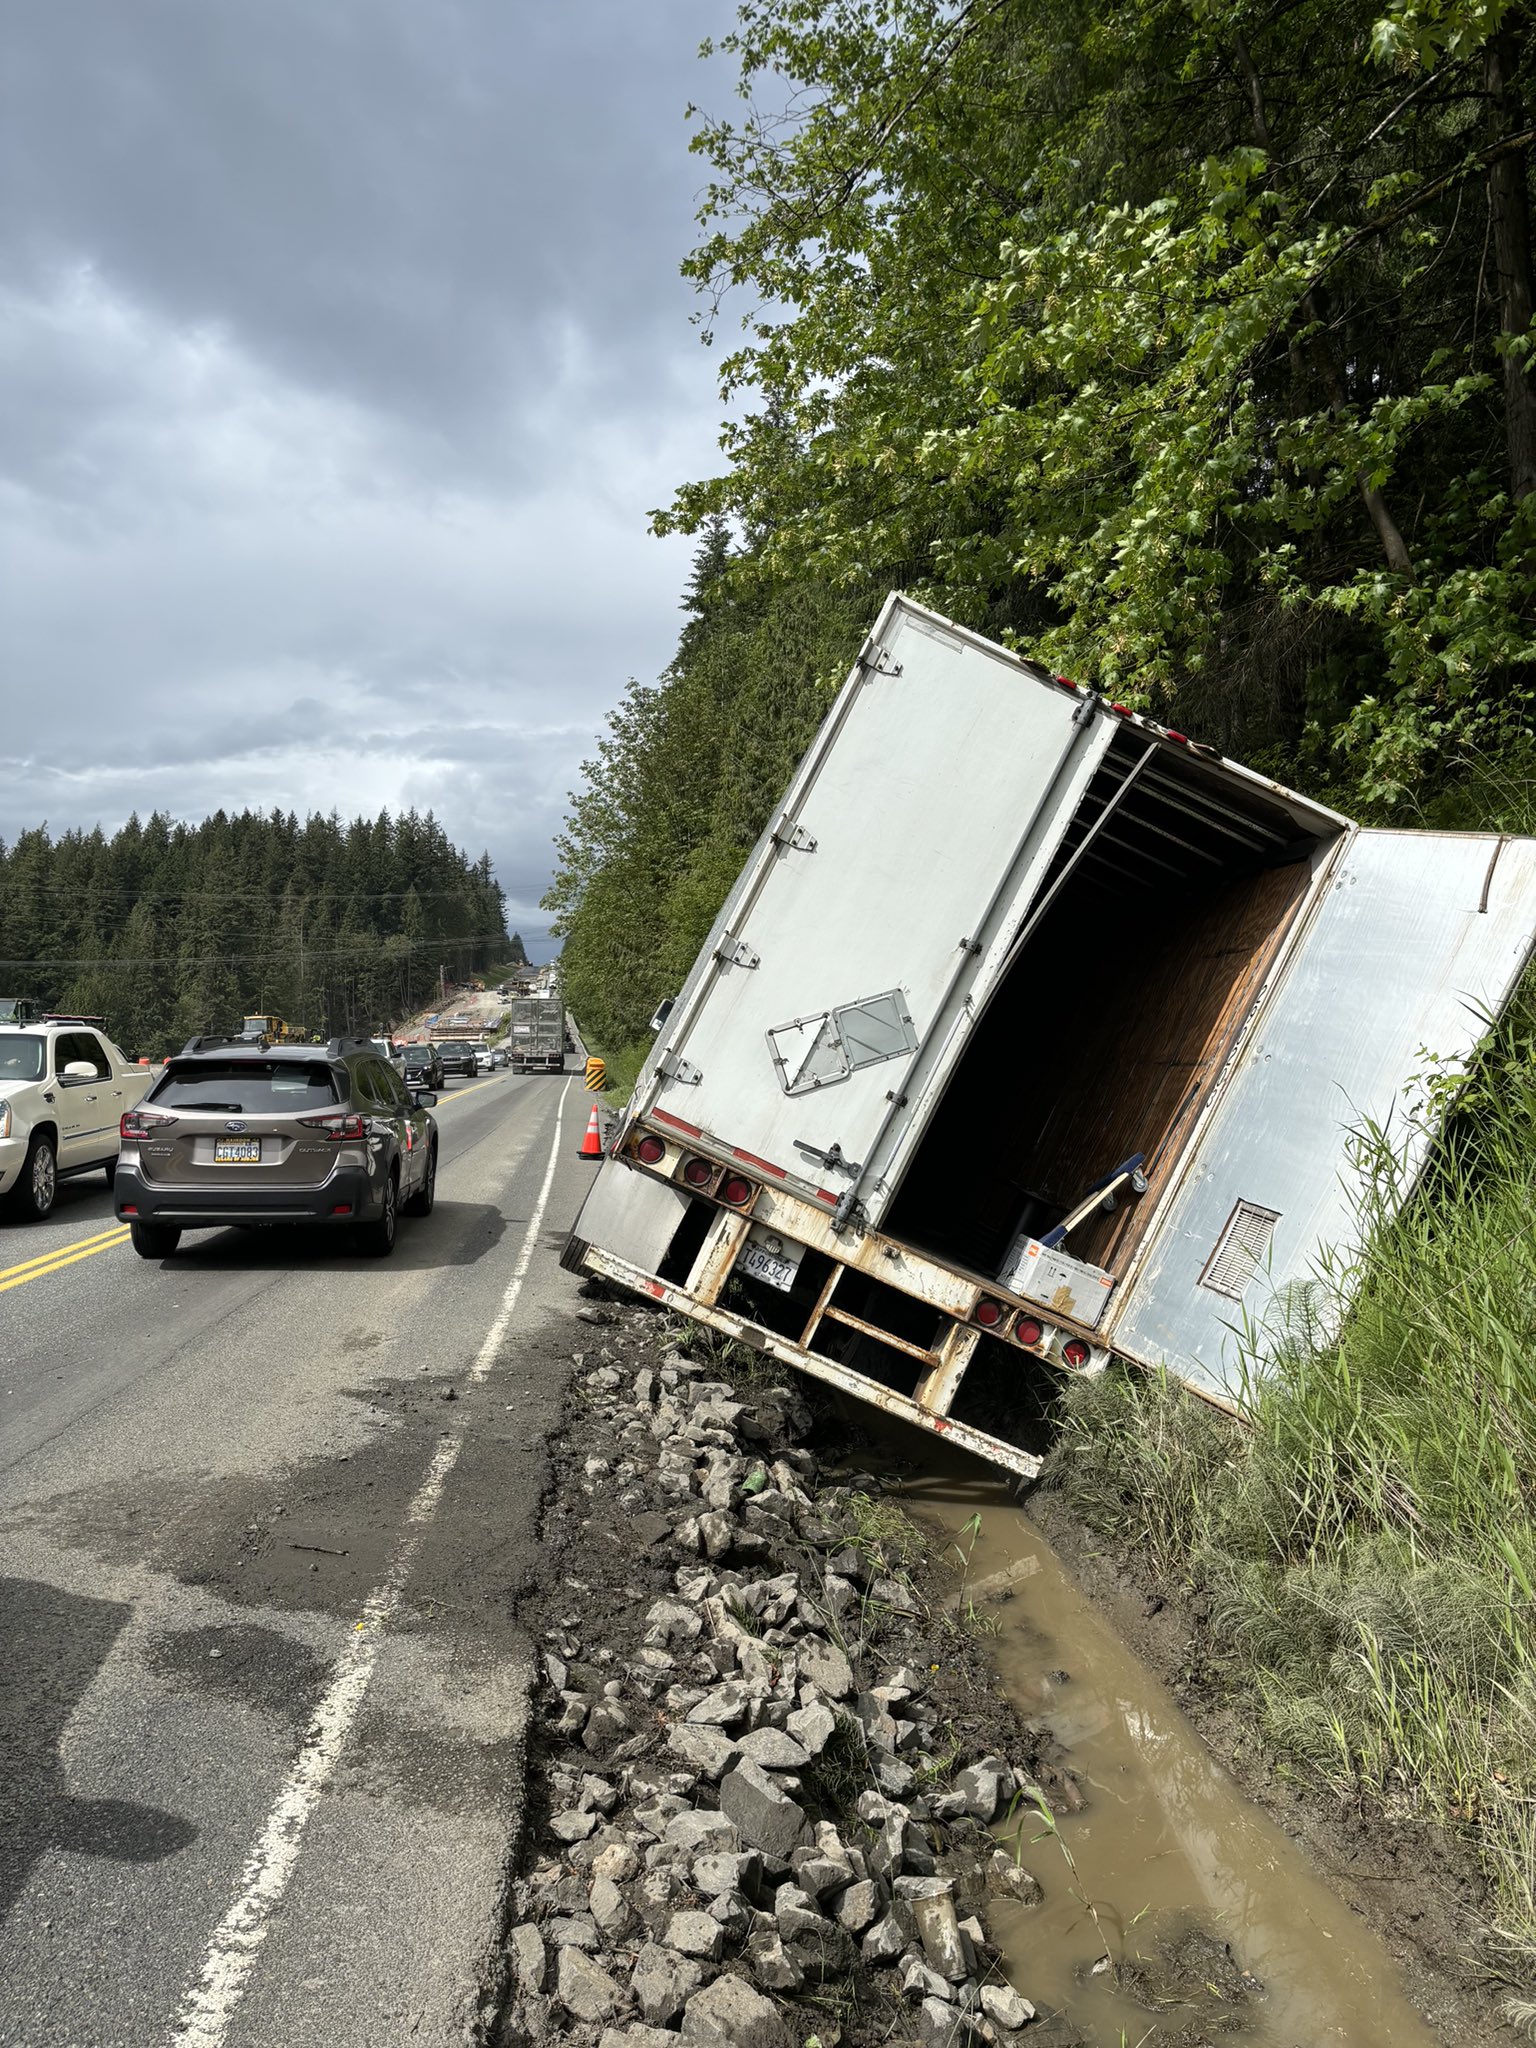  Updated: SR 18 between I-90 and Issaquah Hobert Road Closed - Living Snoqualmie 